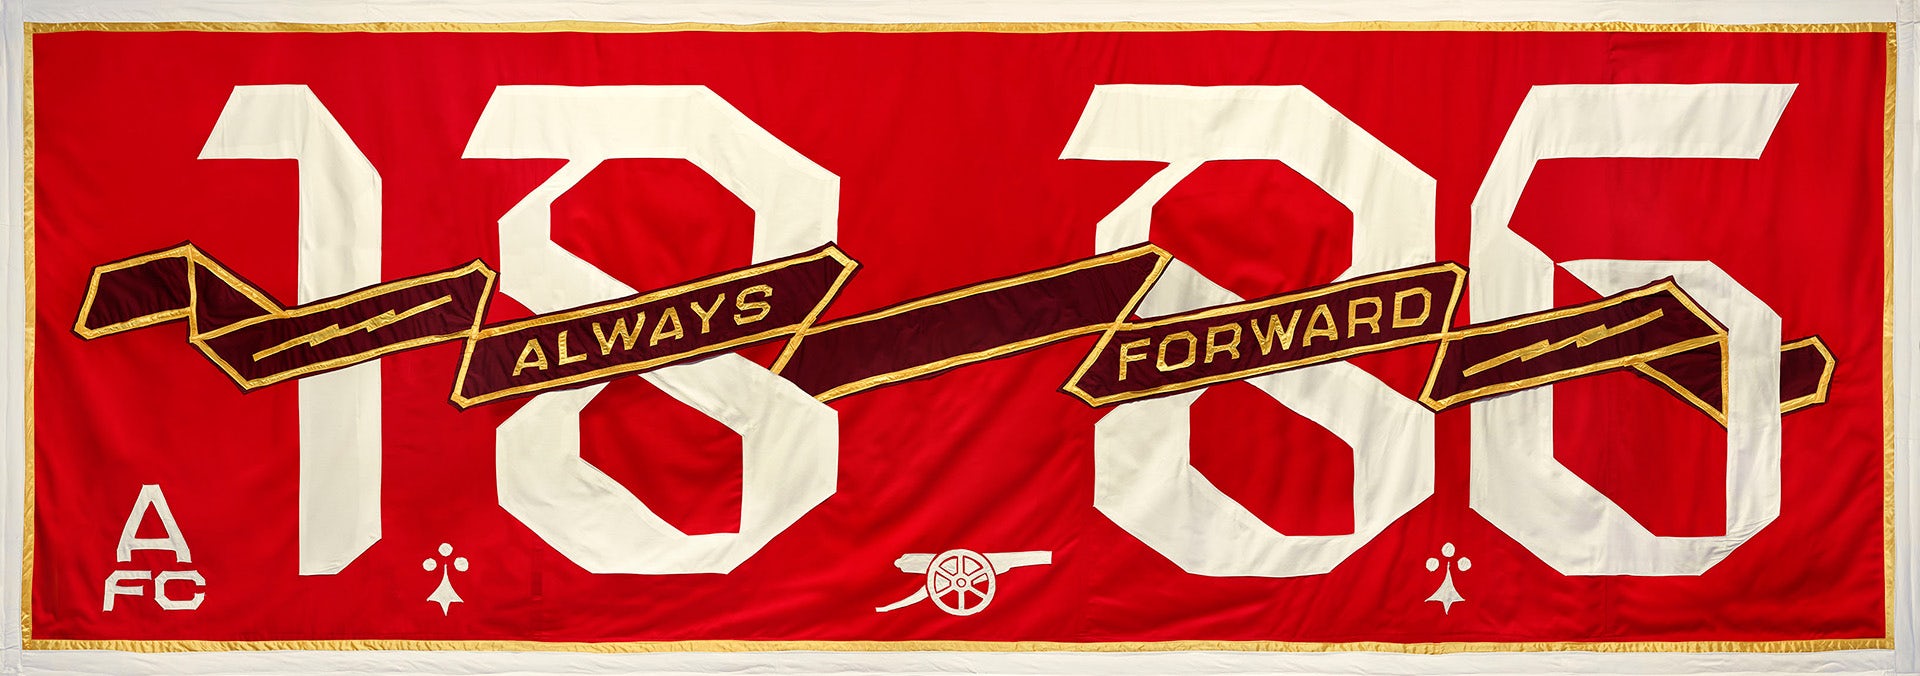 Image shows a red Arsenal banner by Jeremy Deller with the date 1886 in white angular lettering, and a scroll running through the middle of the image which reads 'Always Forward'